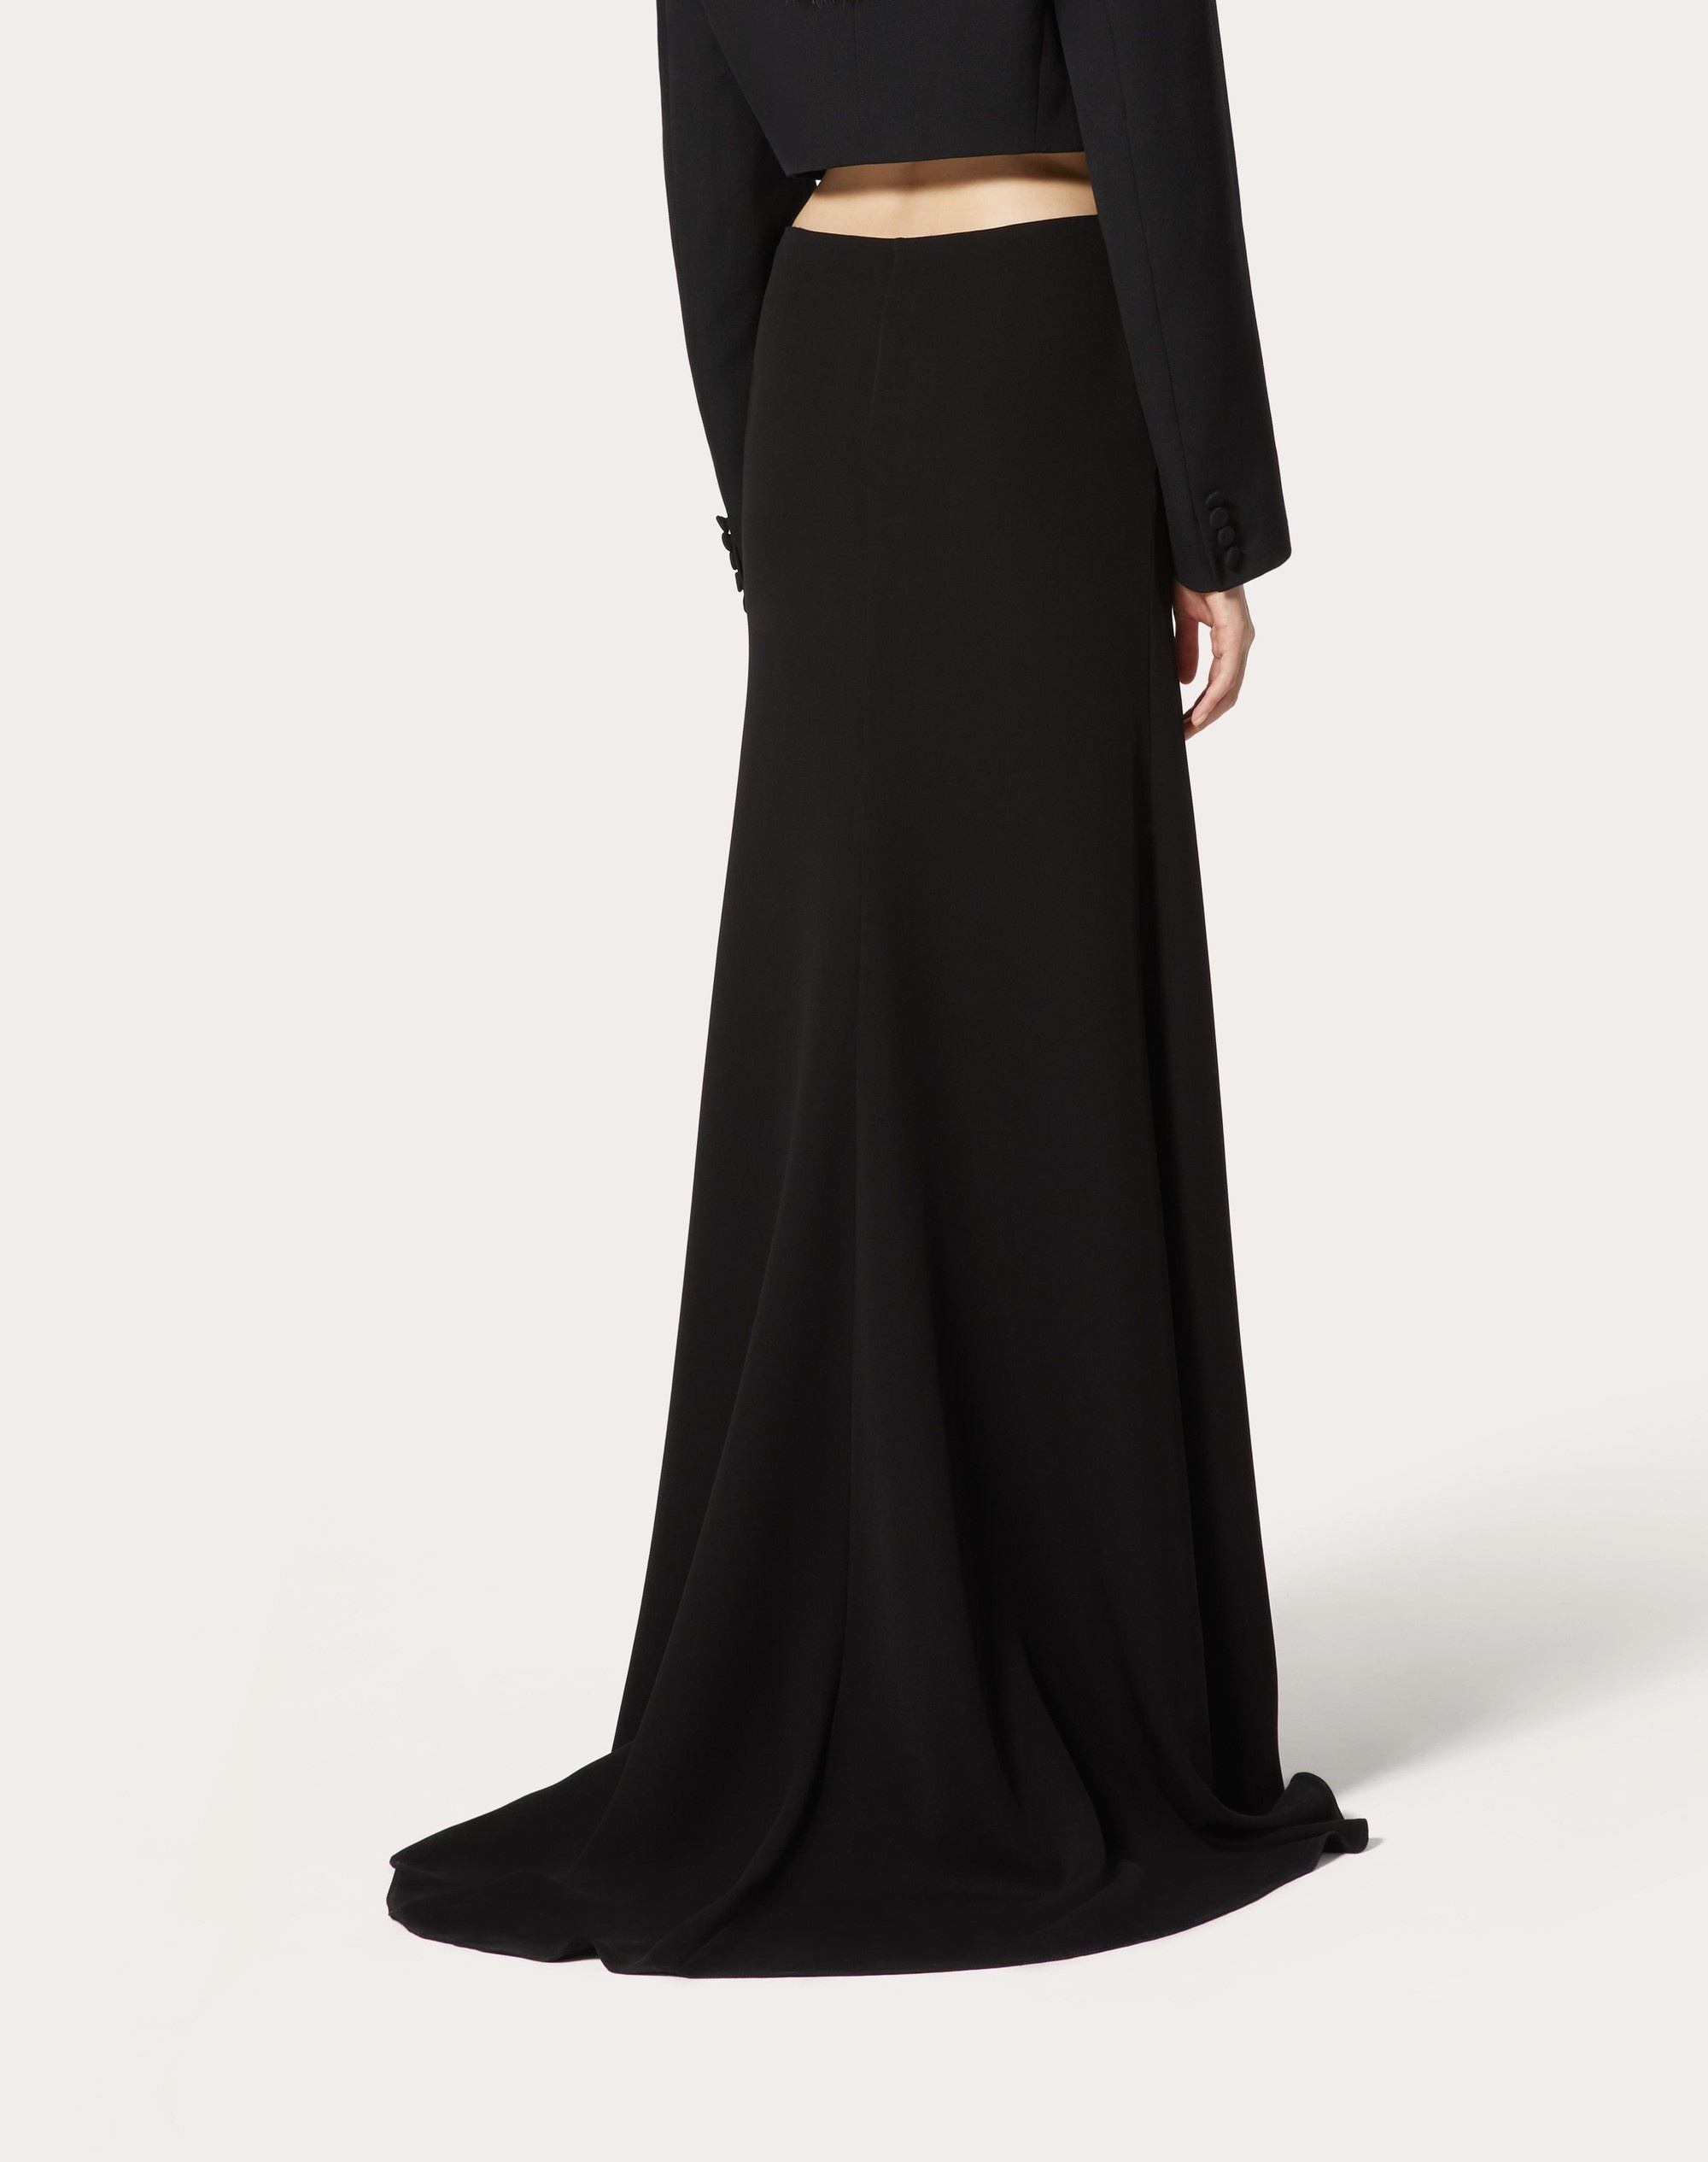 CADY COUTURE LONG SKIRT - 4